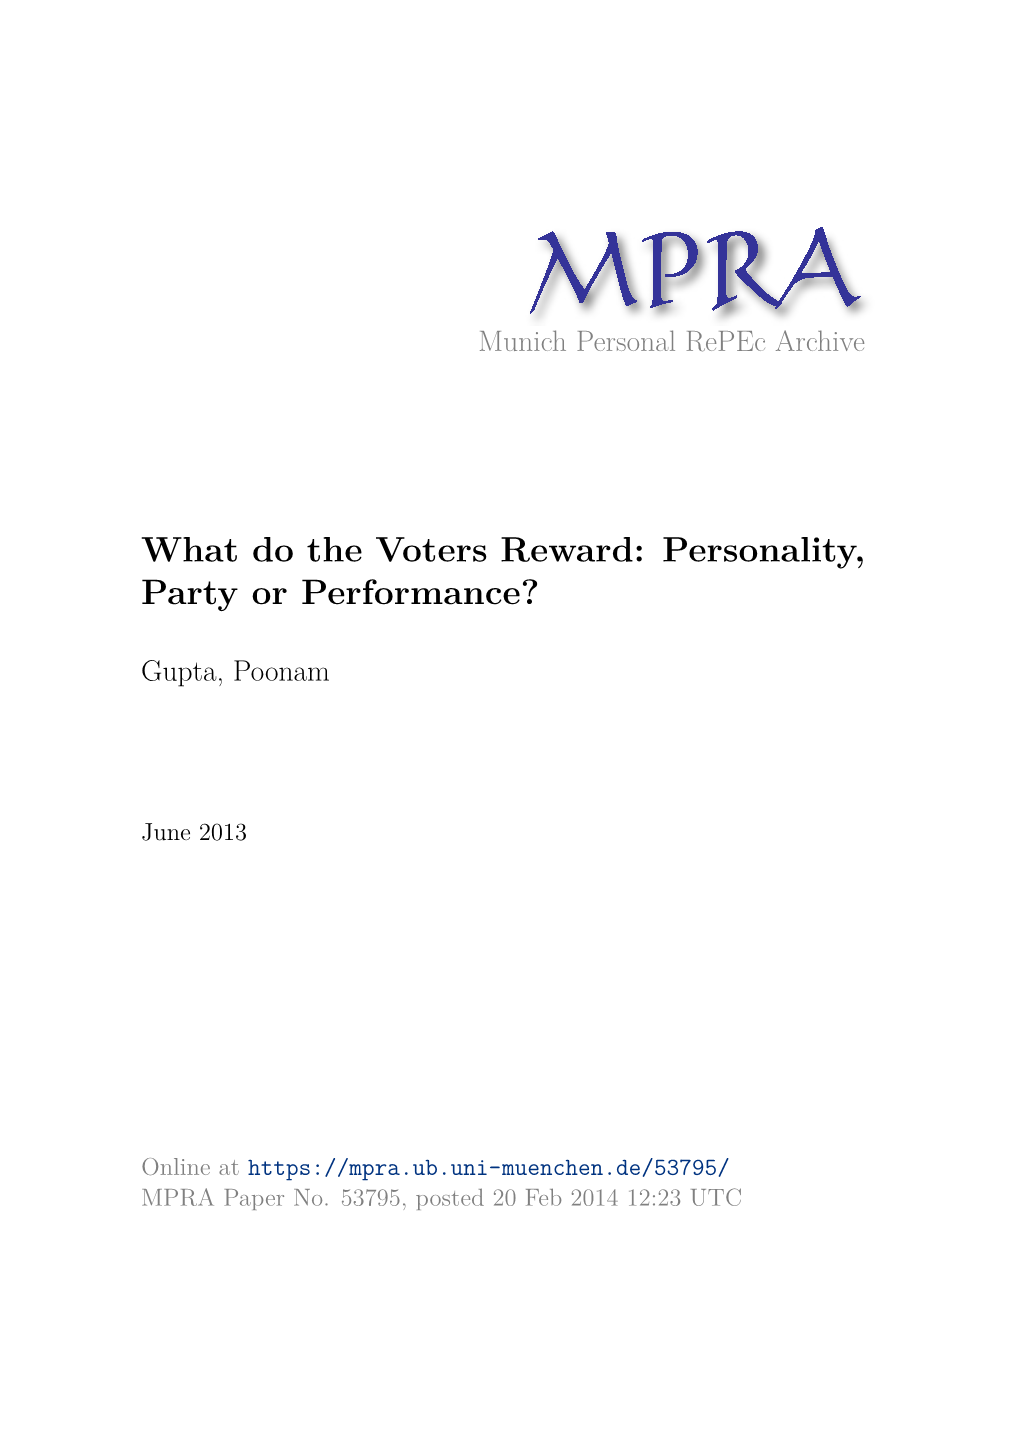 What Do the Voters Reward: Personality, Party Or Performance?